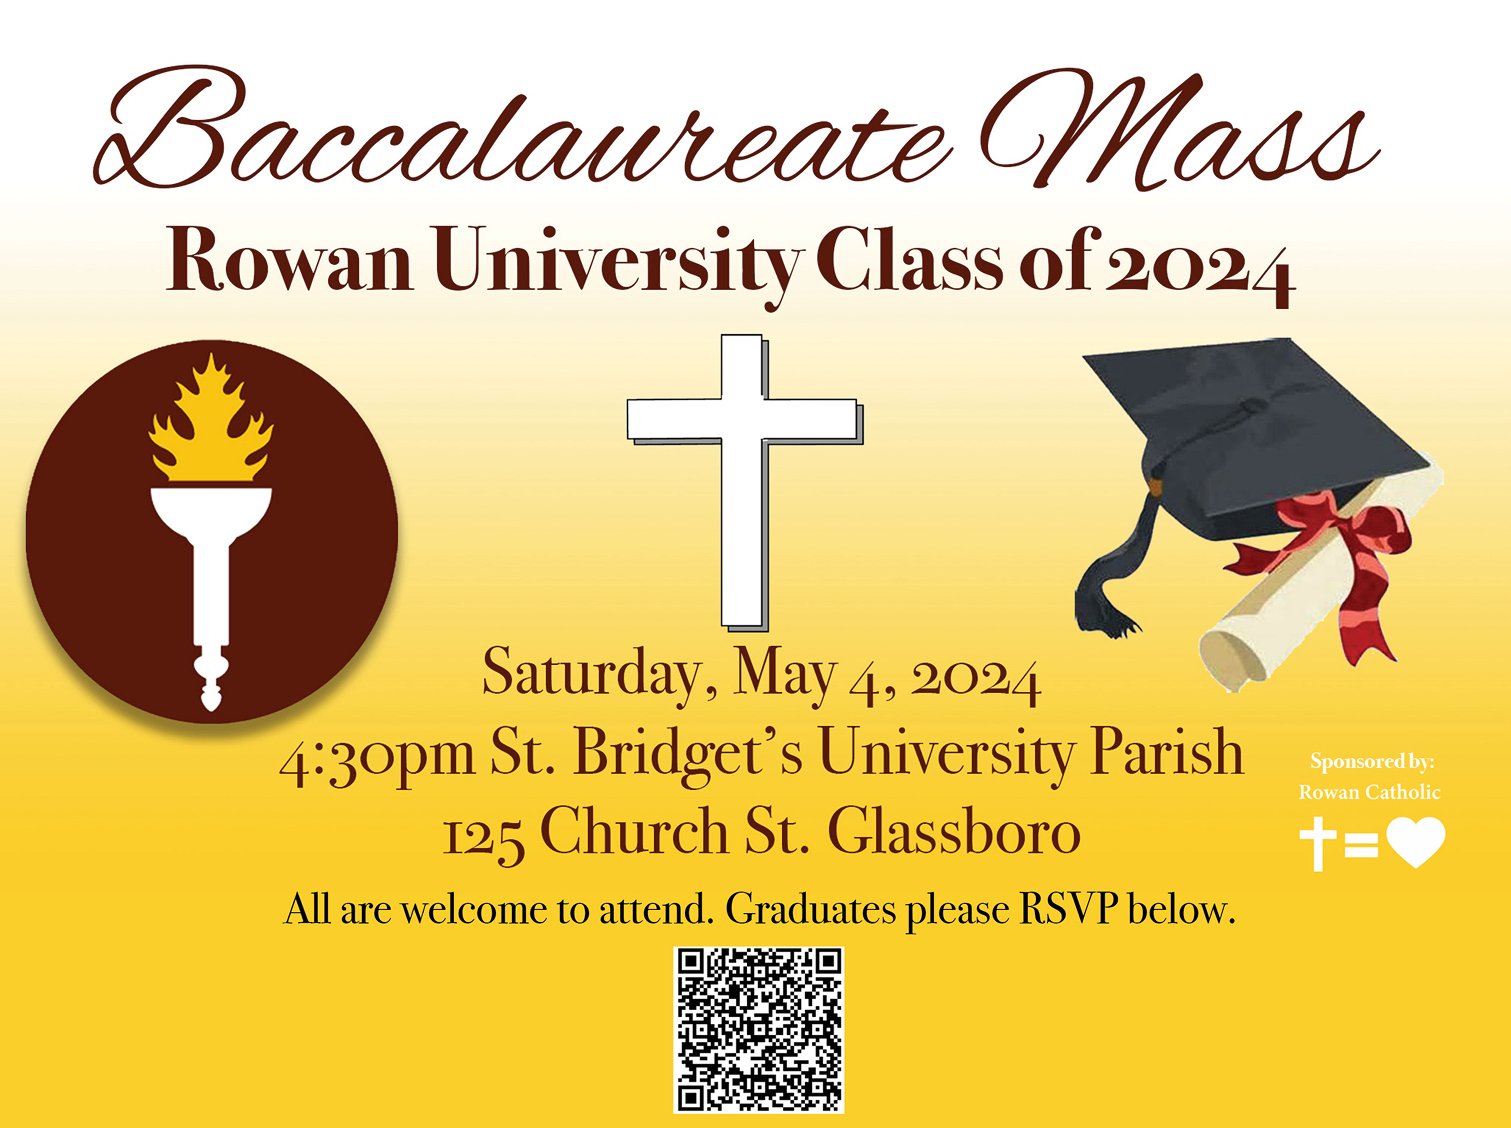 All graduates from Rowan, as well as all RCSJ grads, (spring or summer; if you have a cap &amp; gown to walk), please respond to the 4:30pm Baccalaureate Mass taking place this Saturday, 5/4:

https://docs.google.com/forms/d/e/1FAIpQLScVhVM8YLaOhmk1S